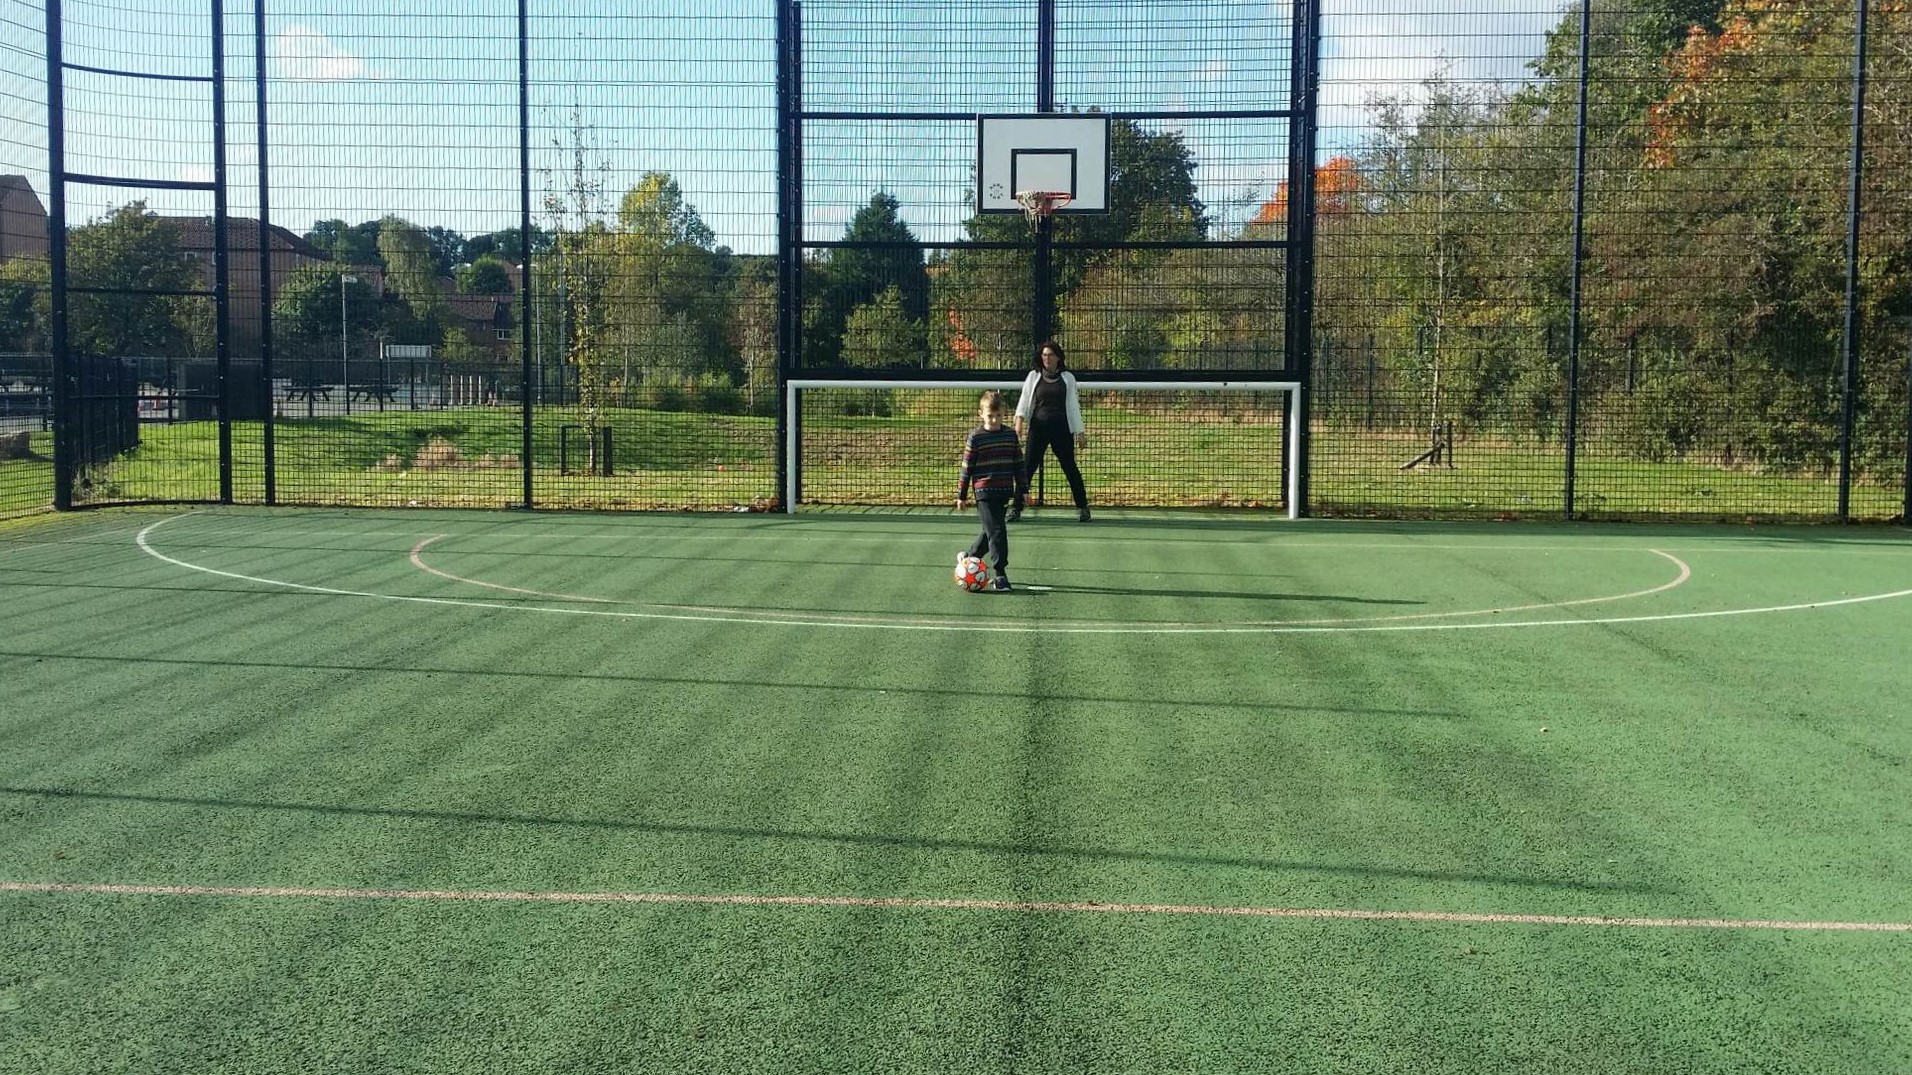 Kirsten Robb in goal at Multi Use Games Area next to St Leonards Primary School